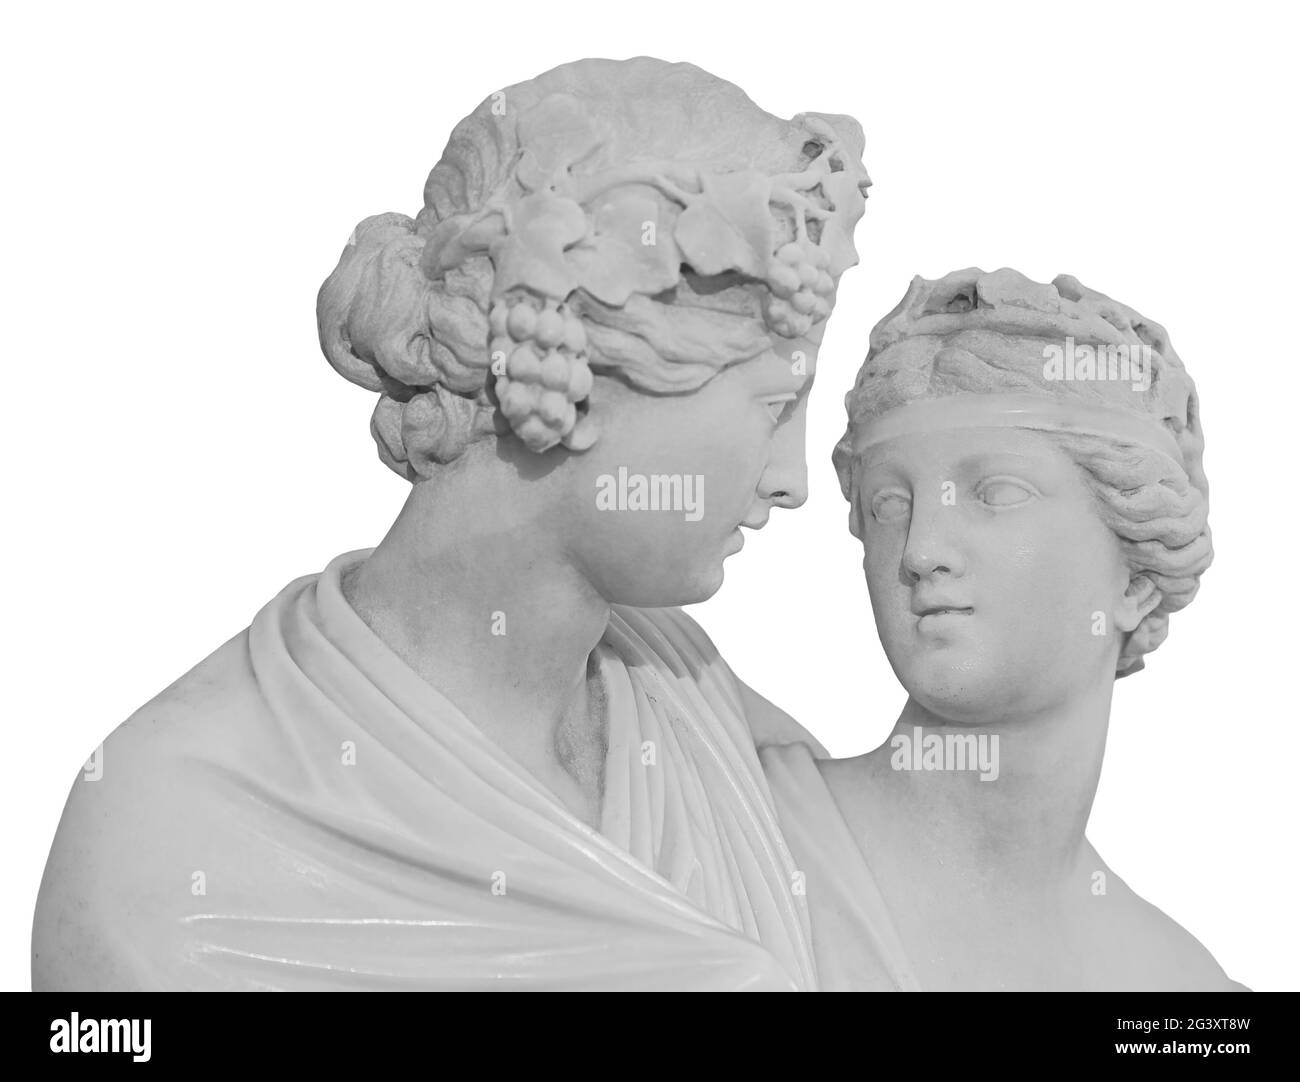 Ancient sculpture of Bacchus and Ariadne. Marble man and woman statue isolated on white background. Stock Photo